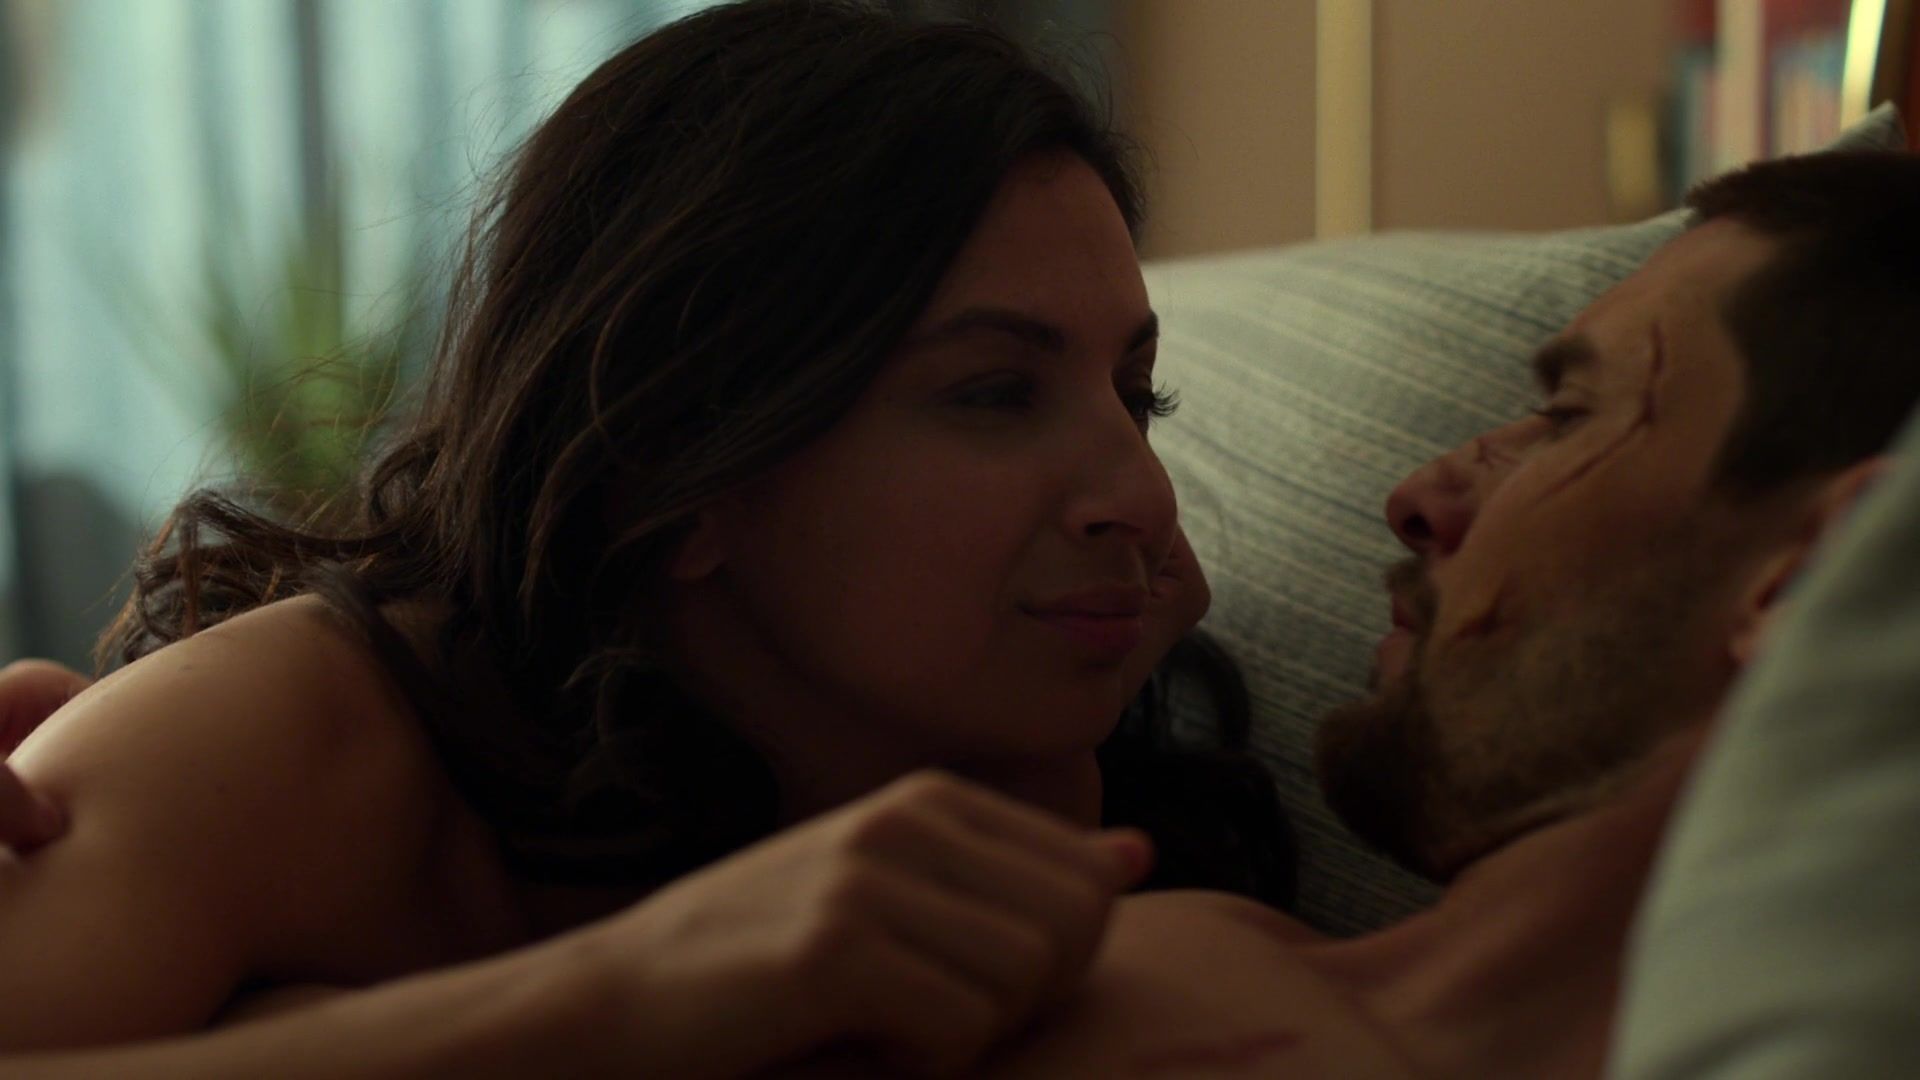 Free Fuck Vidz Amber Rose Revah, Floriana Lima nude - The Punisher s02e08 (2019) Pegging - 1